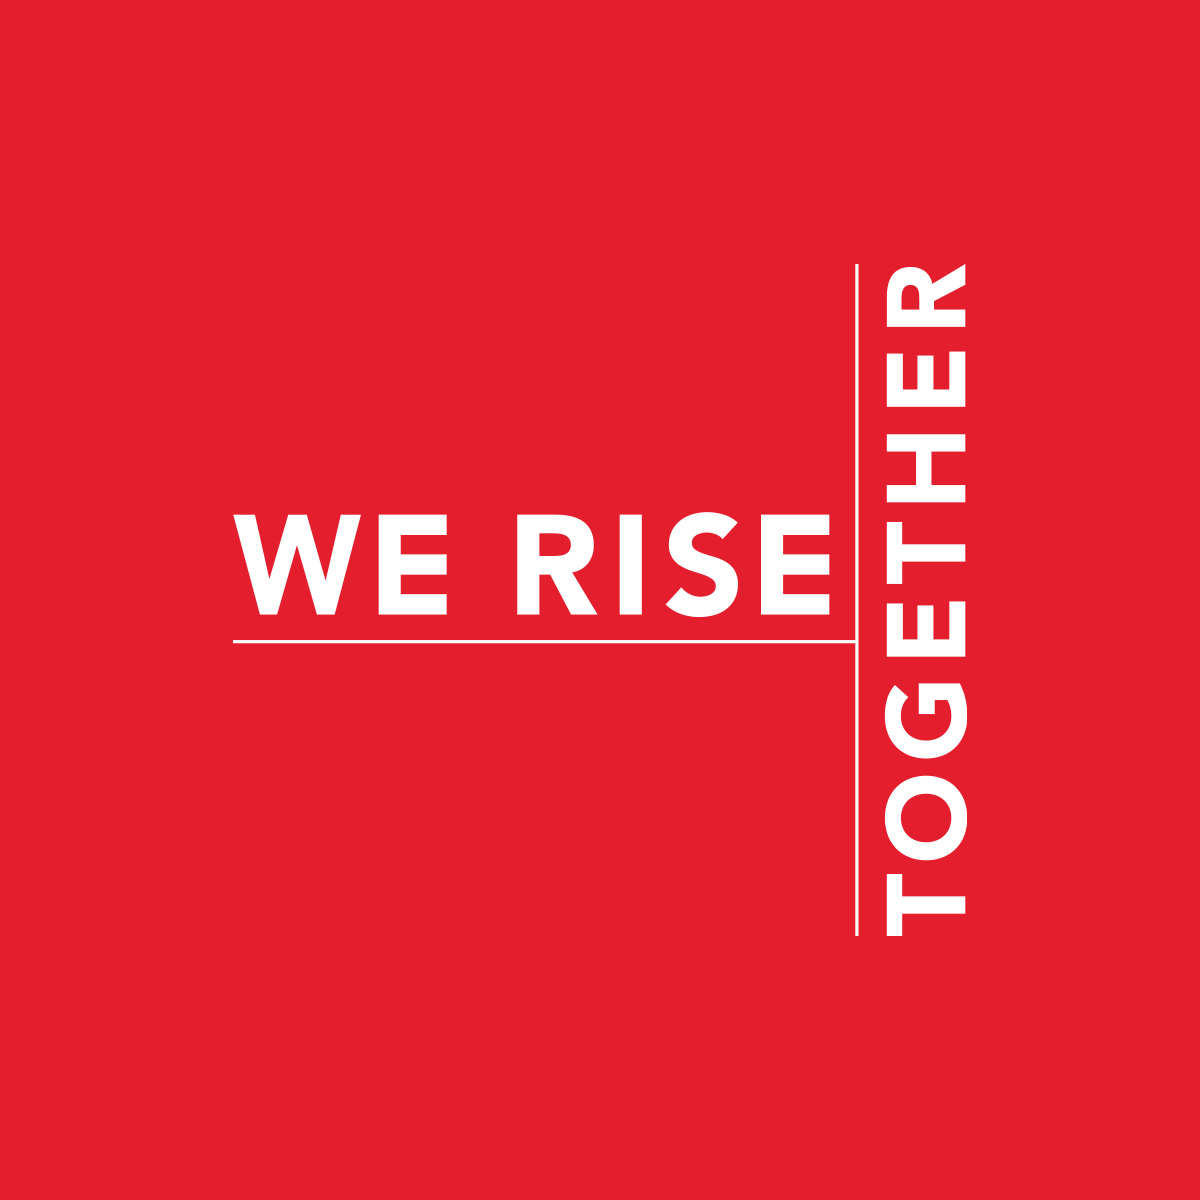 We rise together.